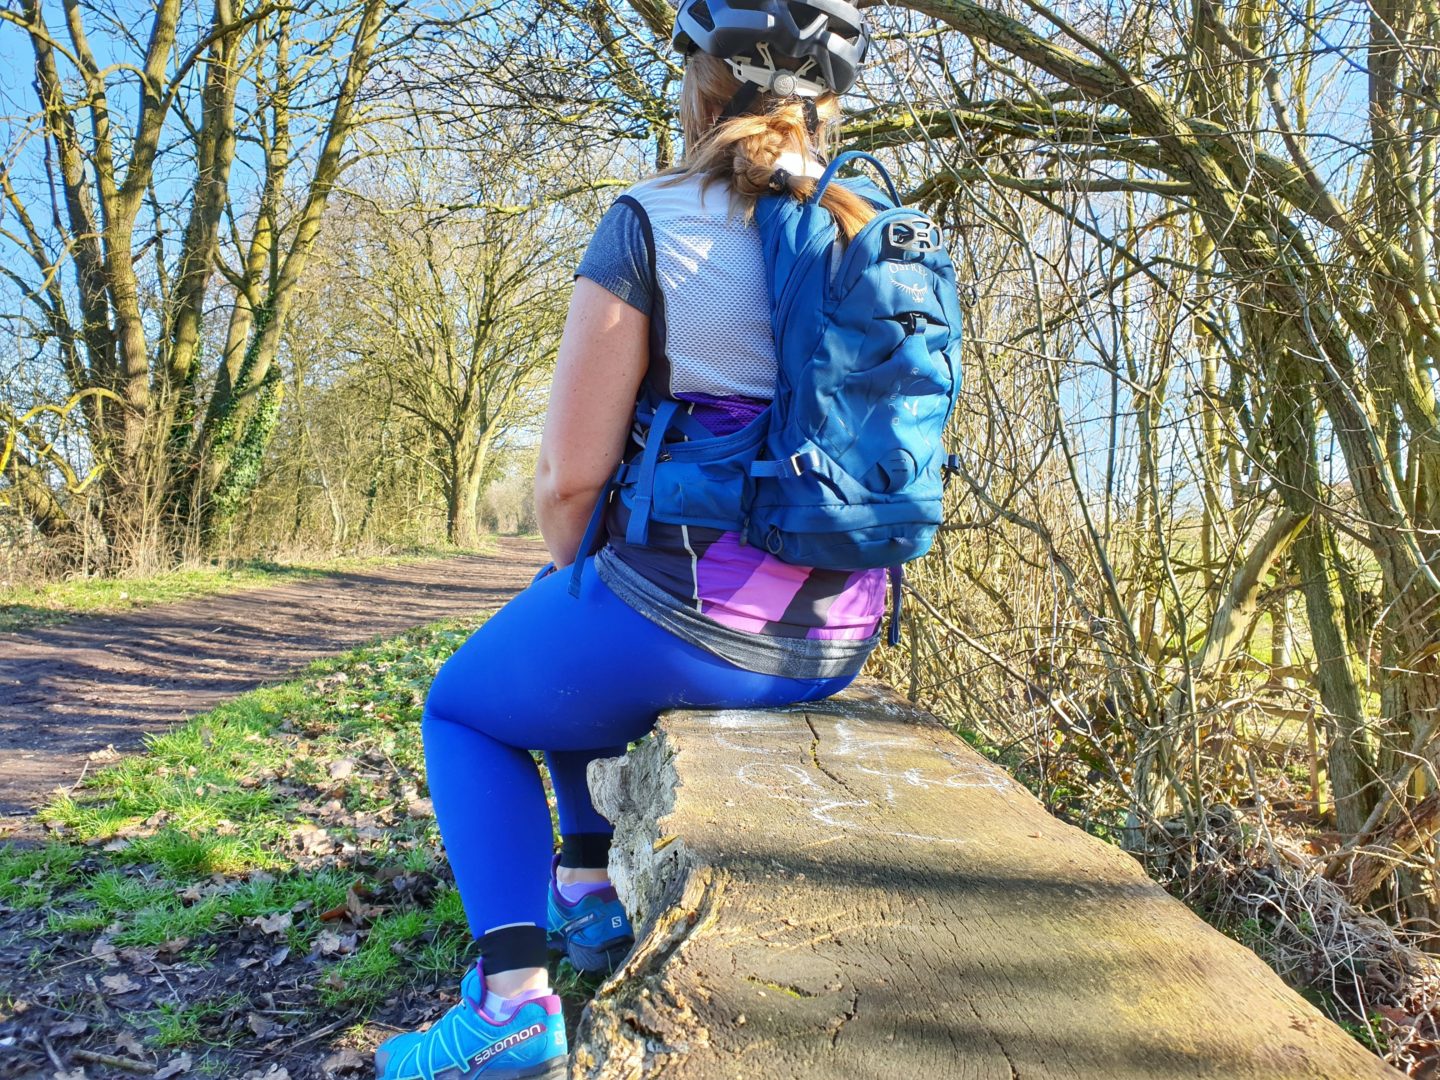 Osprey Raven cycling pack review